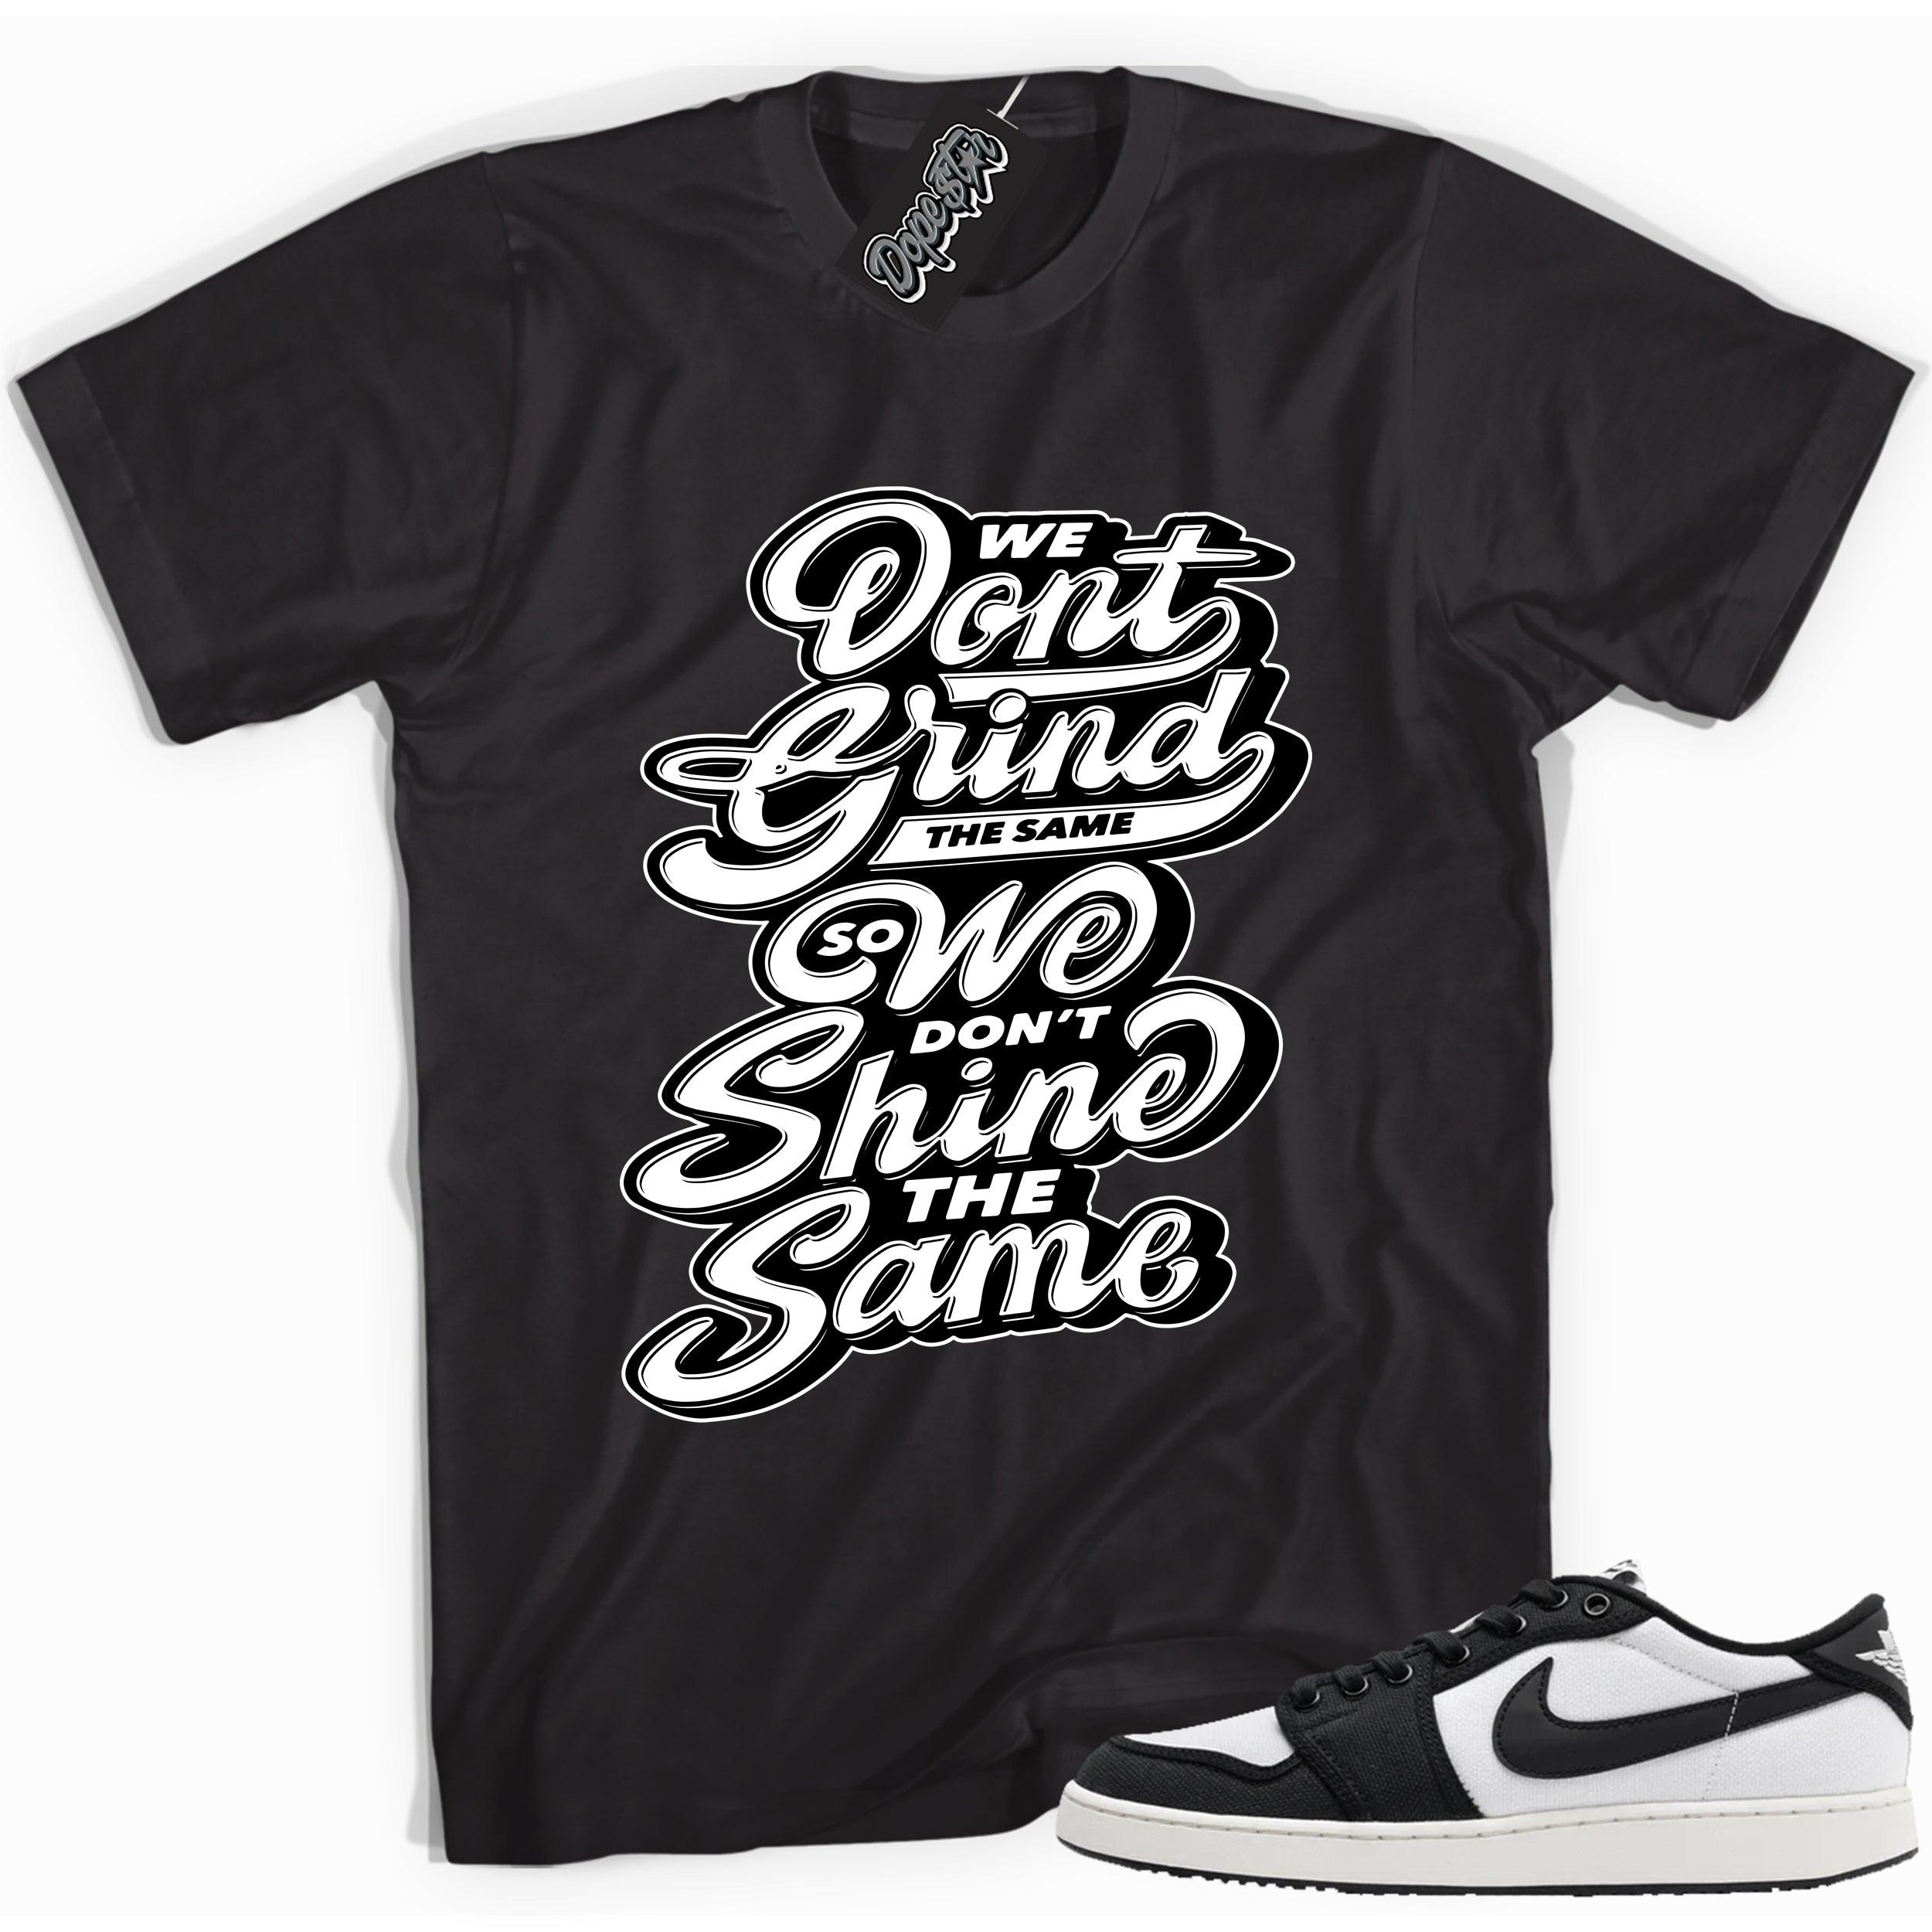 Cool black graphic tee with 'we don't grind the same' print, that perfectly matches Air Jordan 1 Retro Ajko Low Black & White sneakers.